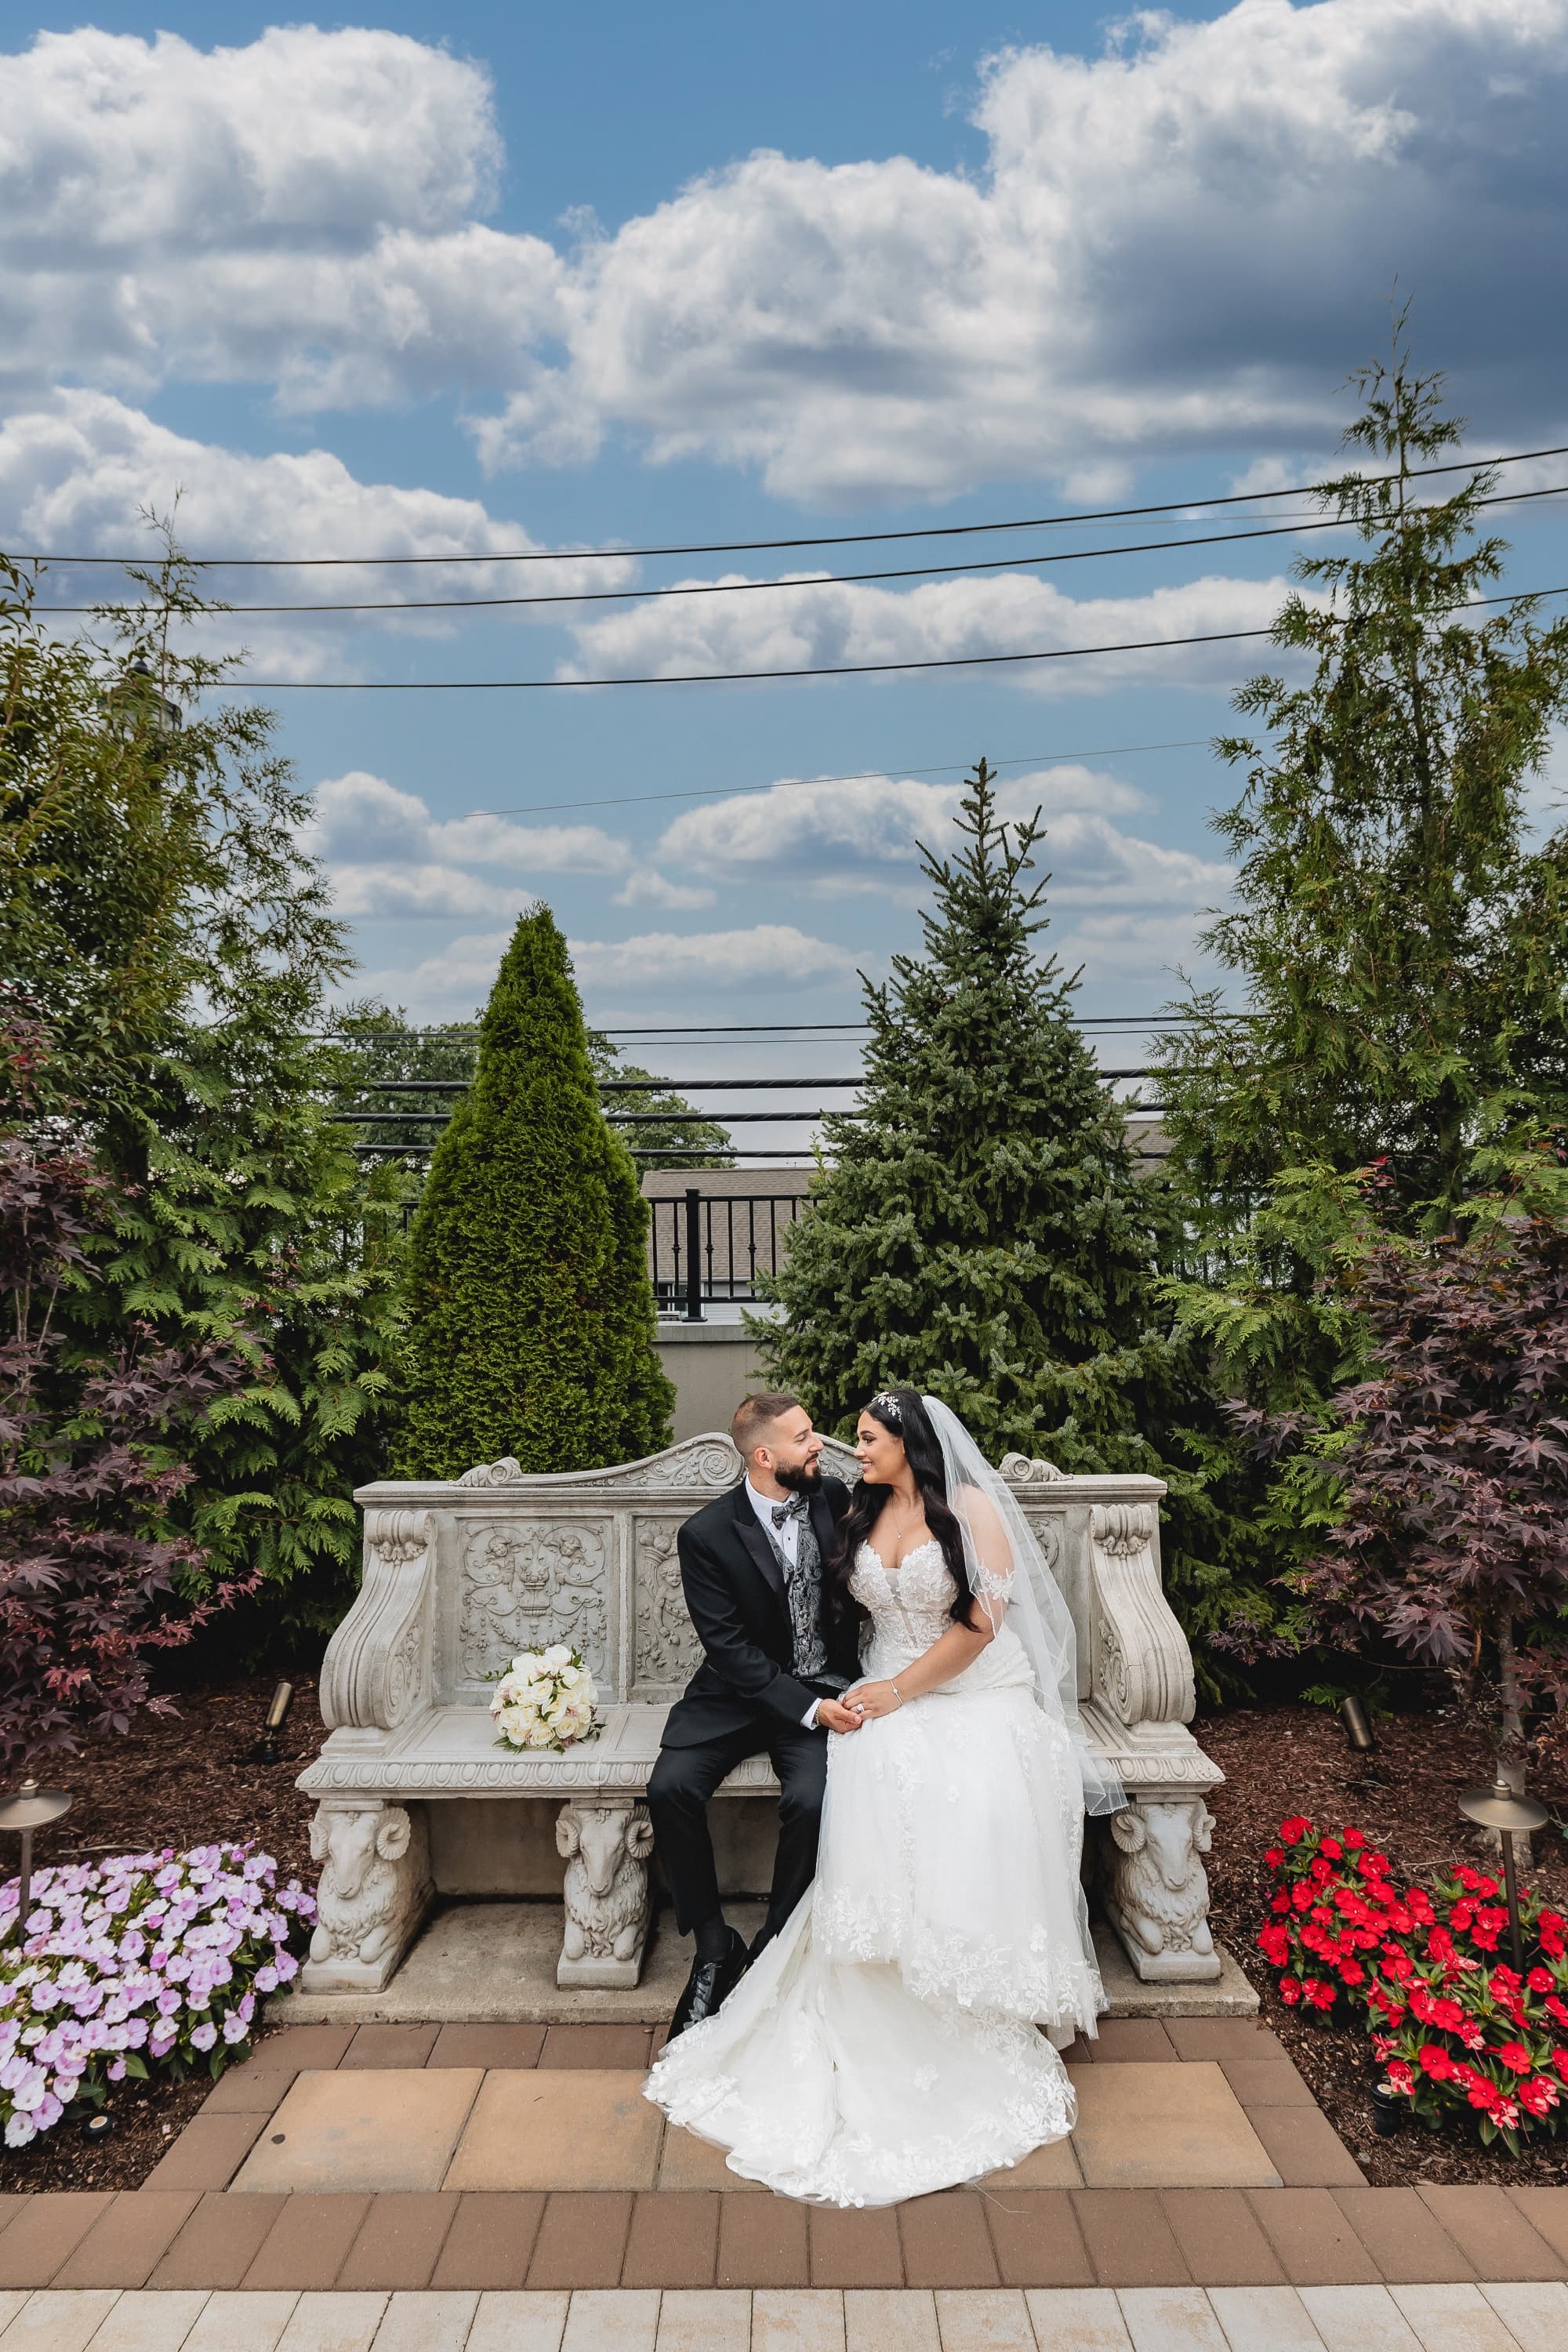 A Photographer's Review: Macaluso's Hawthorne NJ - A Wedding Venue Like No Other